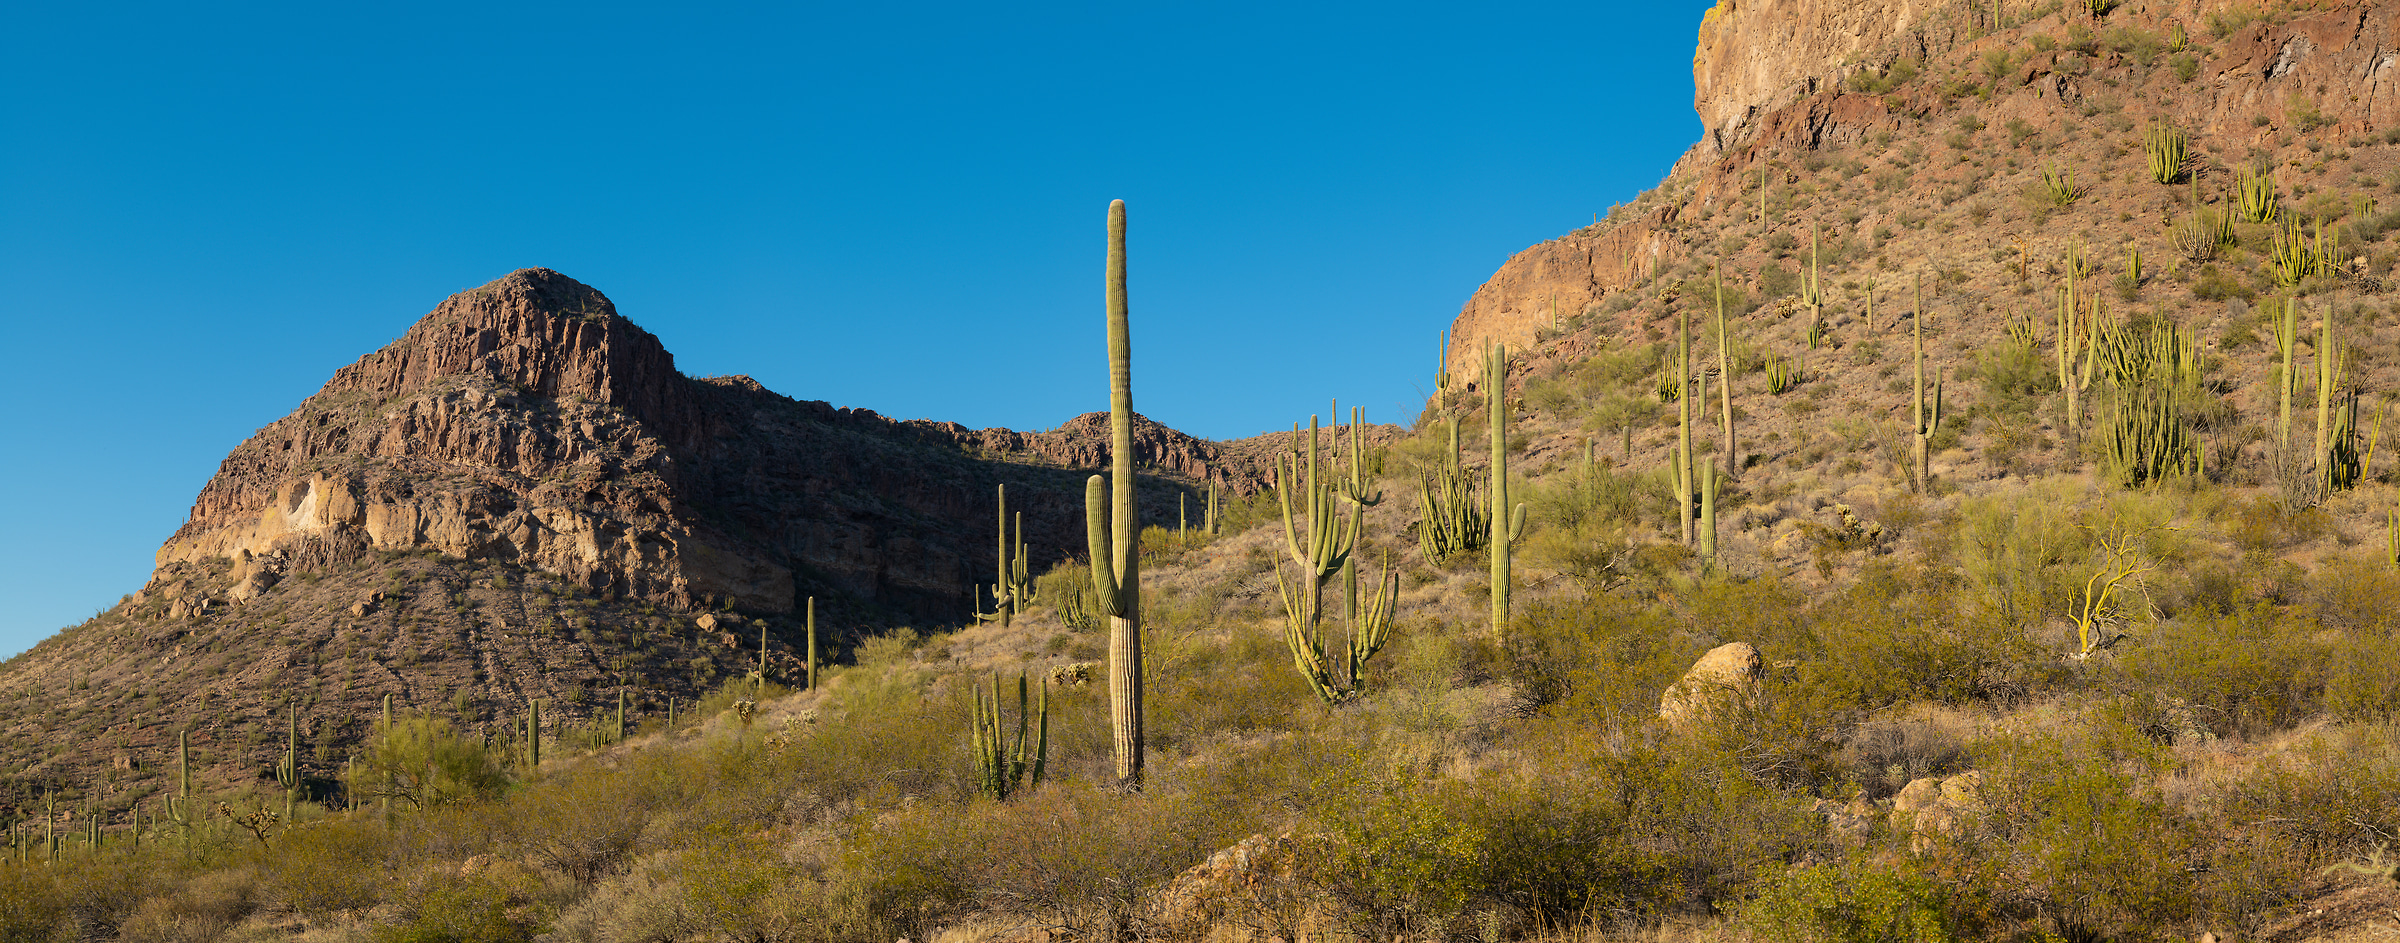 478 megapixels! A very high resolution, large-format VAST photo print of a landscape with cacti; landscape photograph created by Greg Probst in Organ Pipe Cactus National Monument, Arizona.